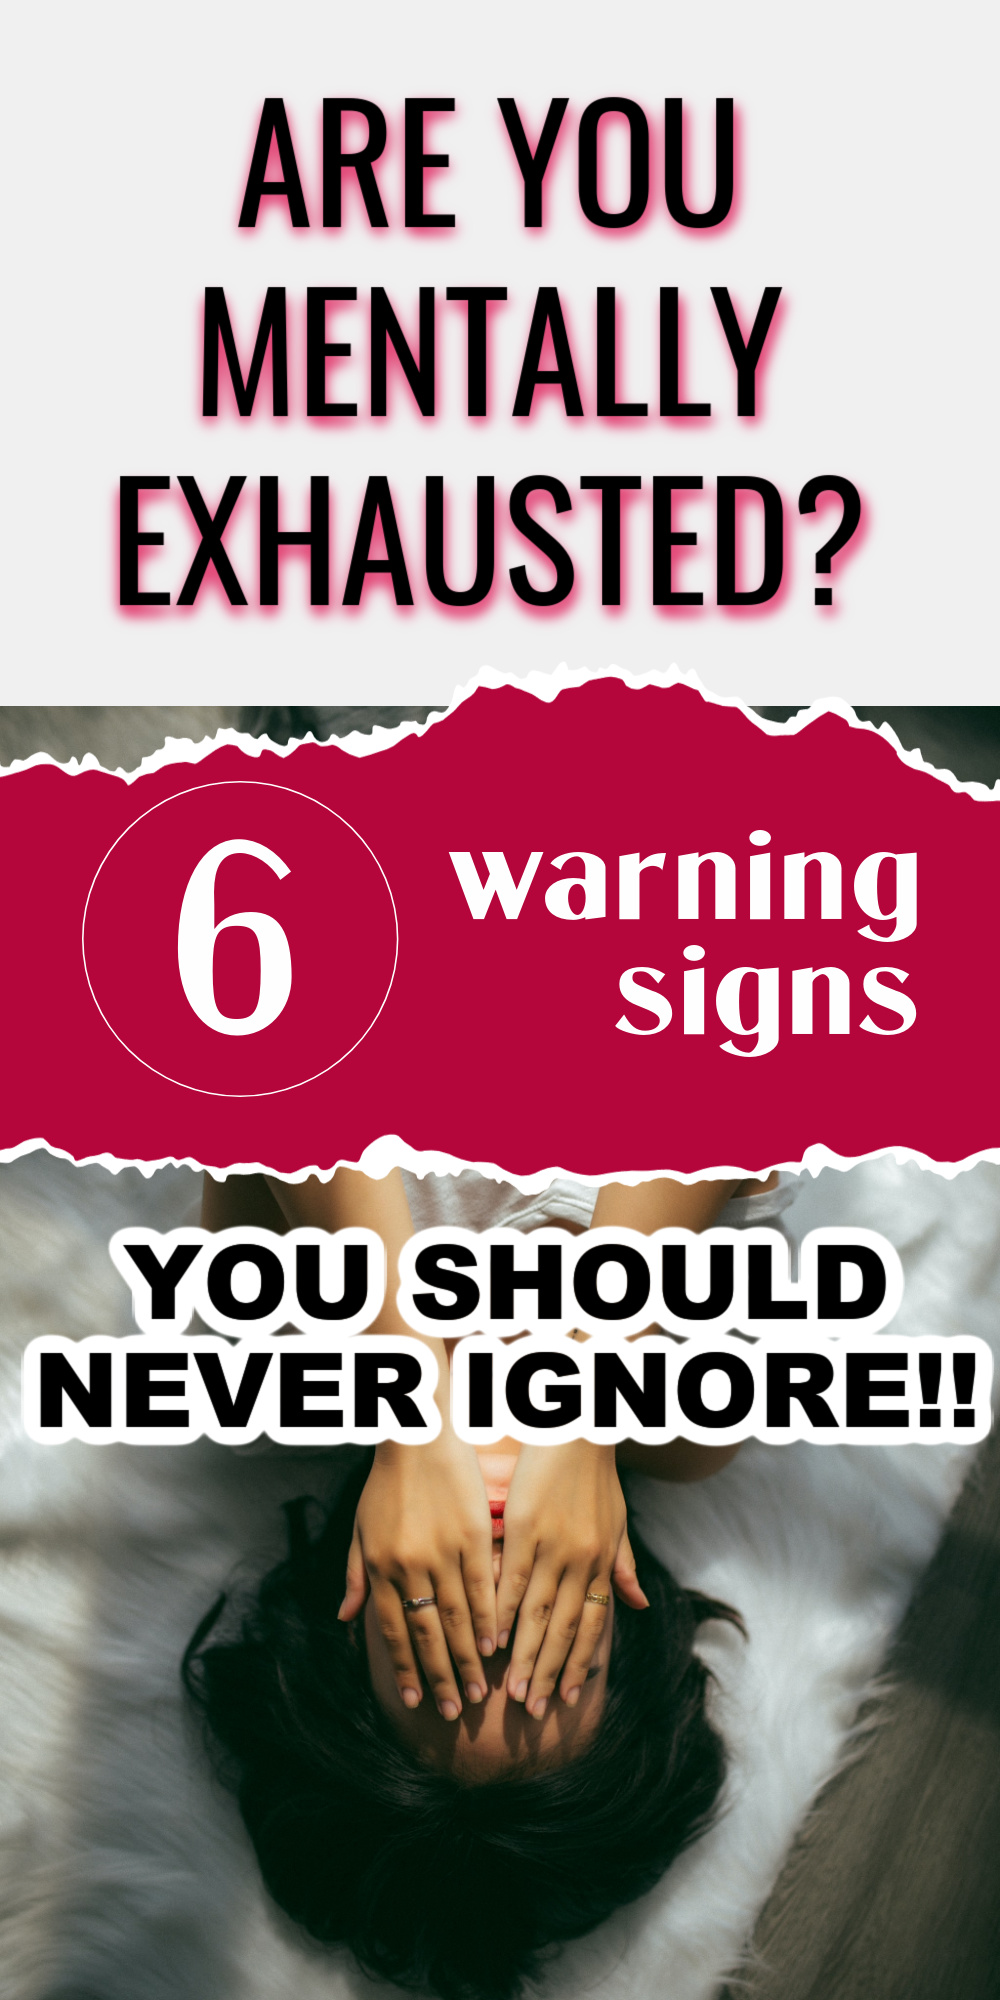 6 Warning Signs Of Mental Exhaustion You Should Never Ignore